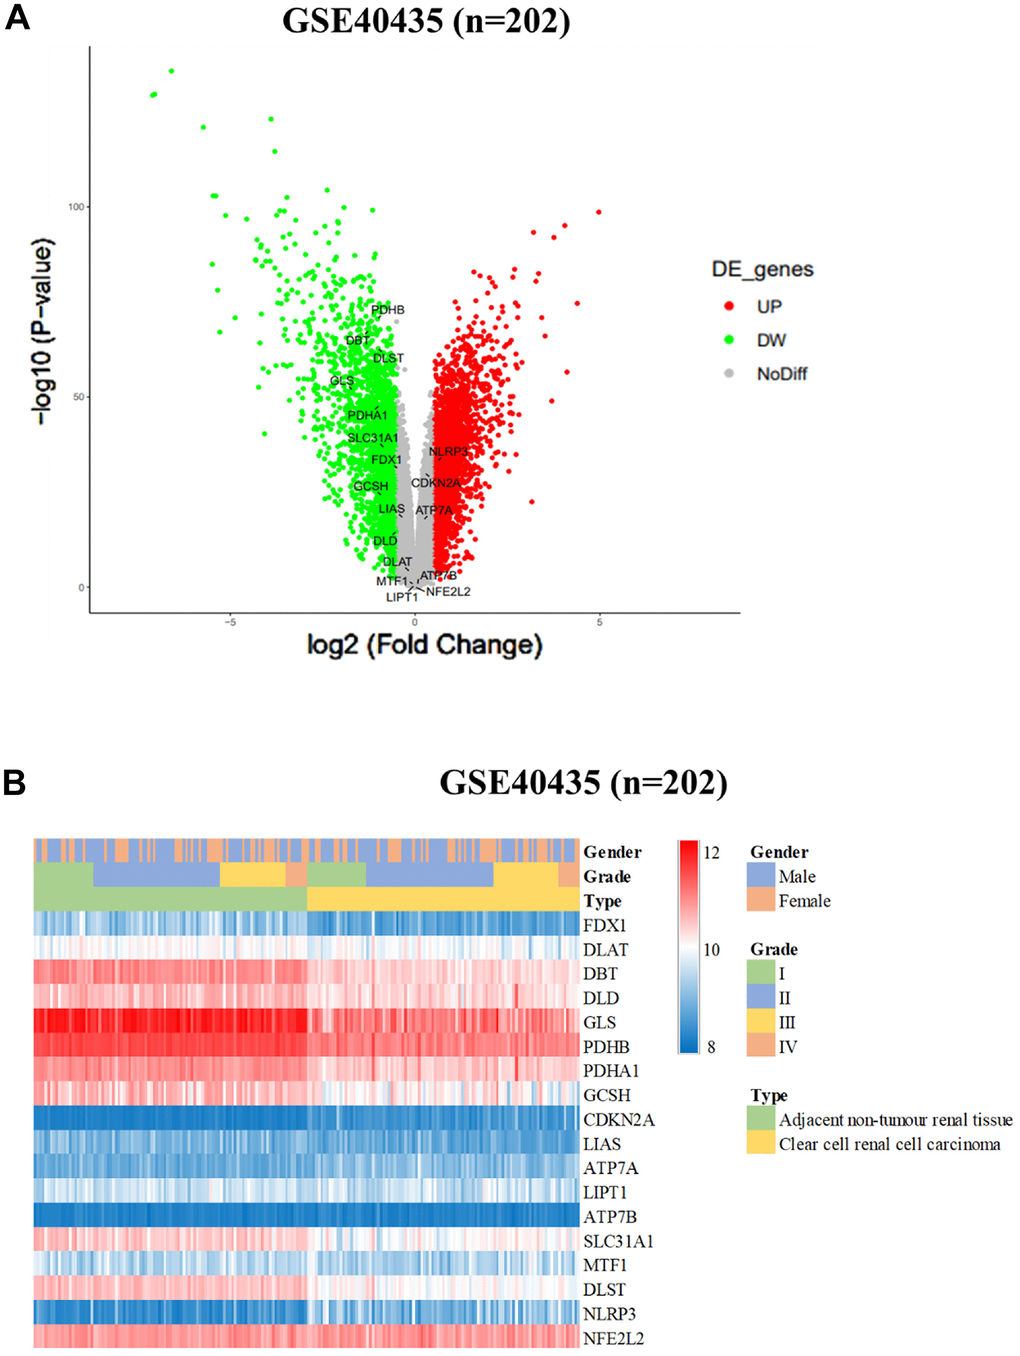 Differential expression of cuproptosis-related genes (CRGs) in ccRCC cohorts. (A) Heatmap and (B) Volcano plot of the differential expression of CRGs in normal tissues in ccRCC cohort GSE40435 (n = 202).